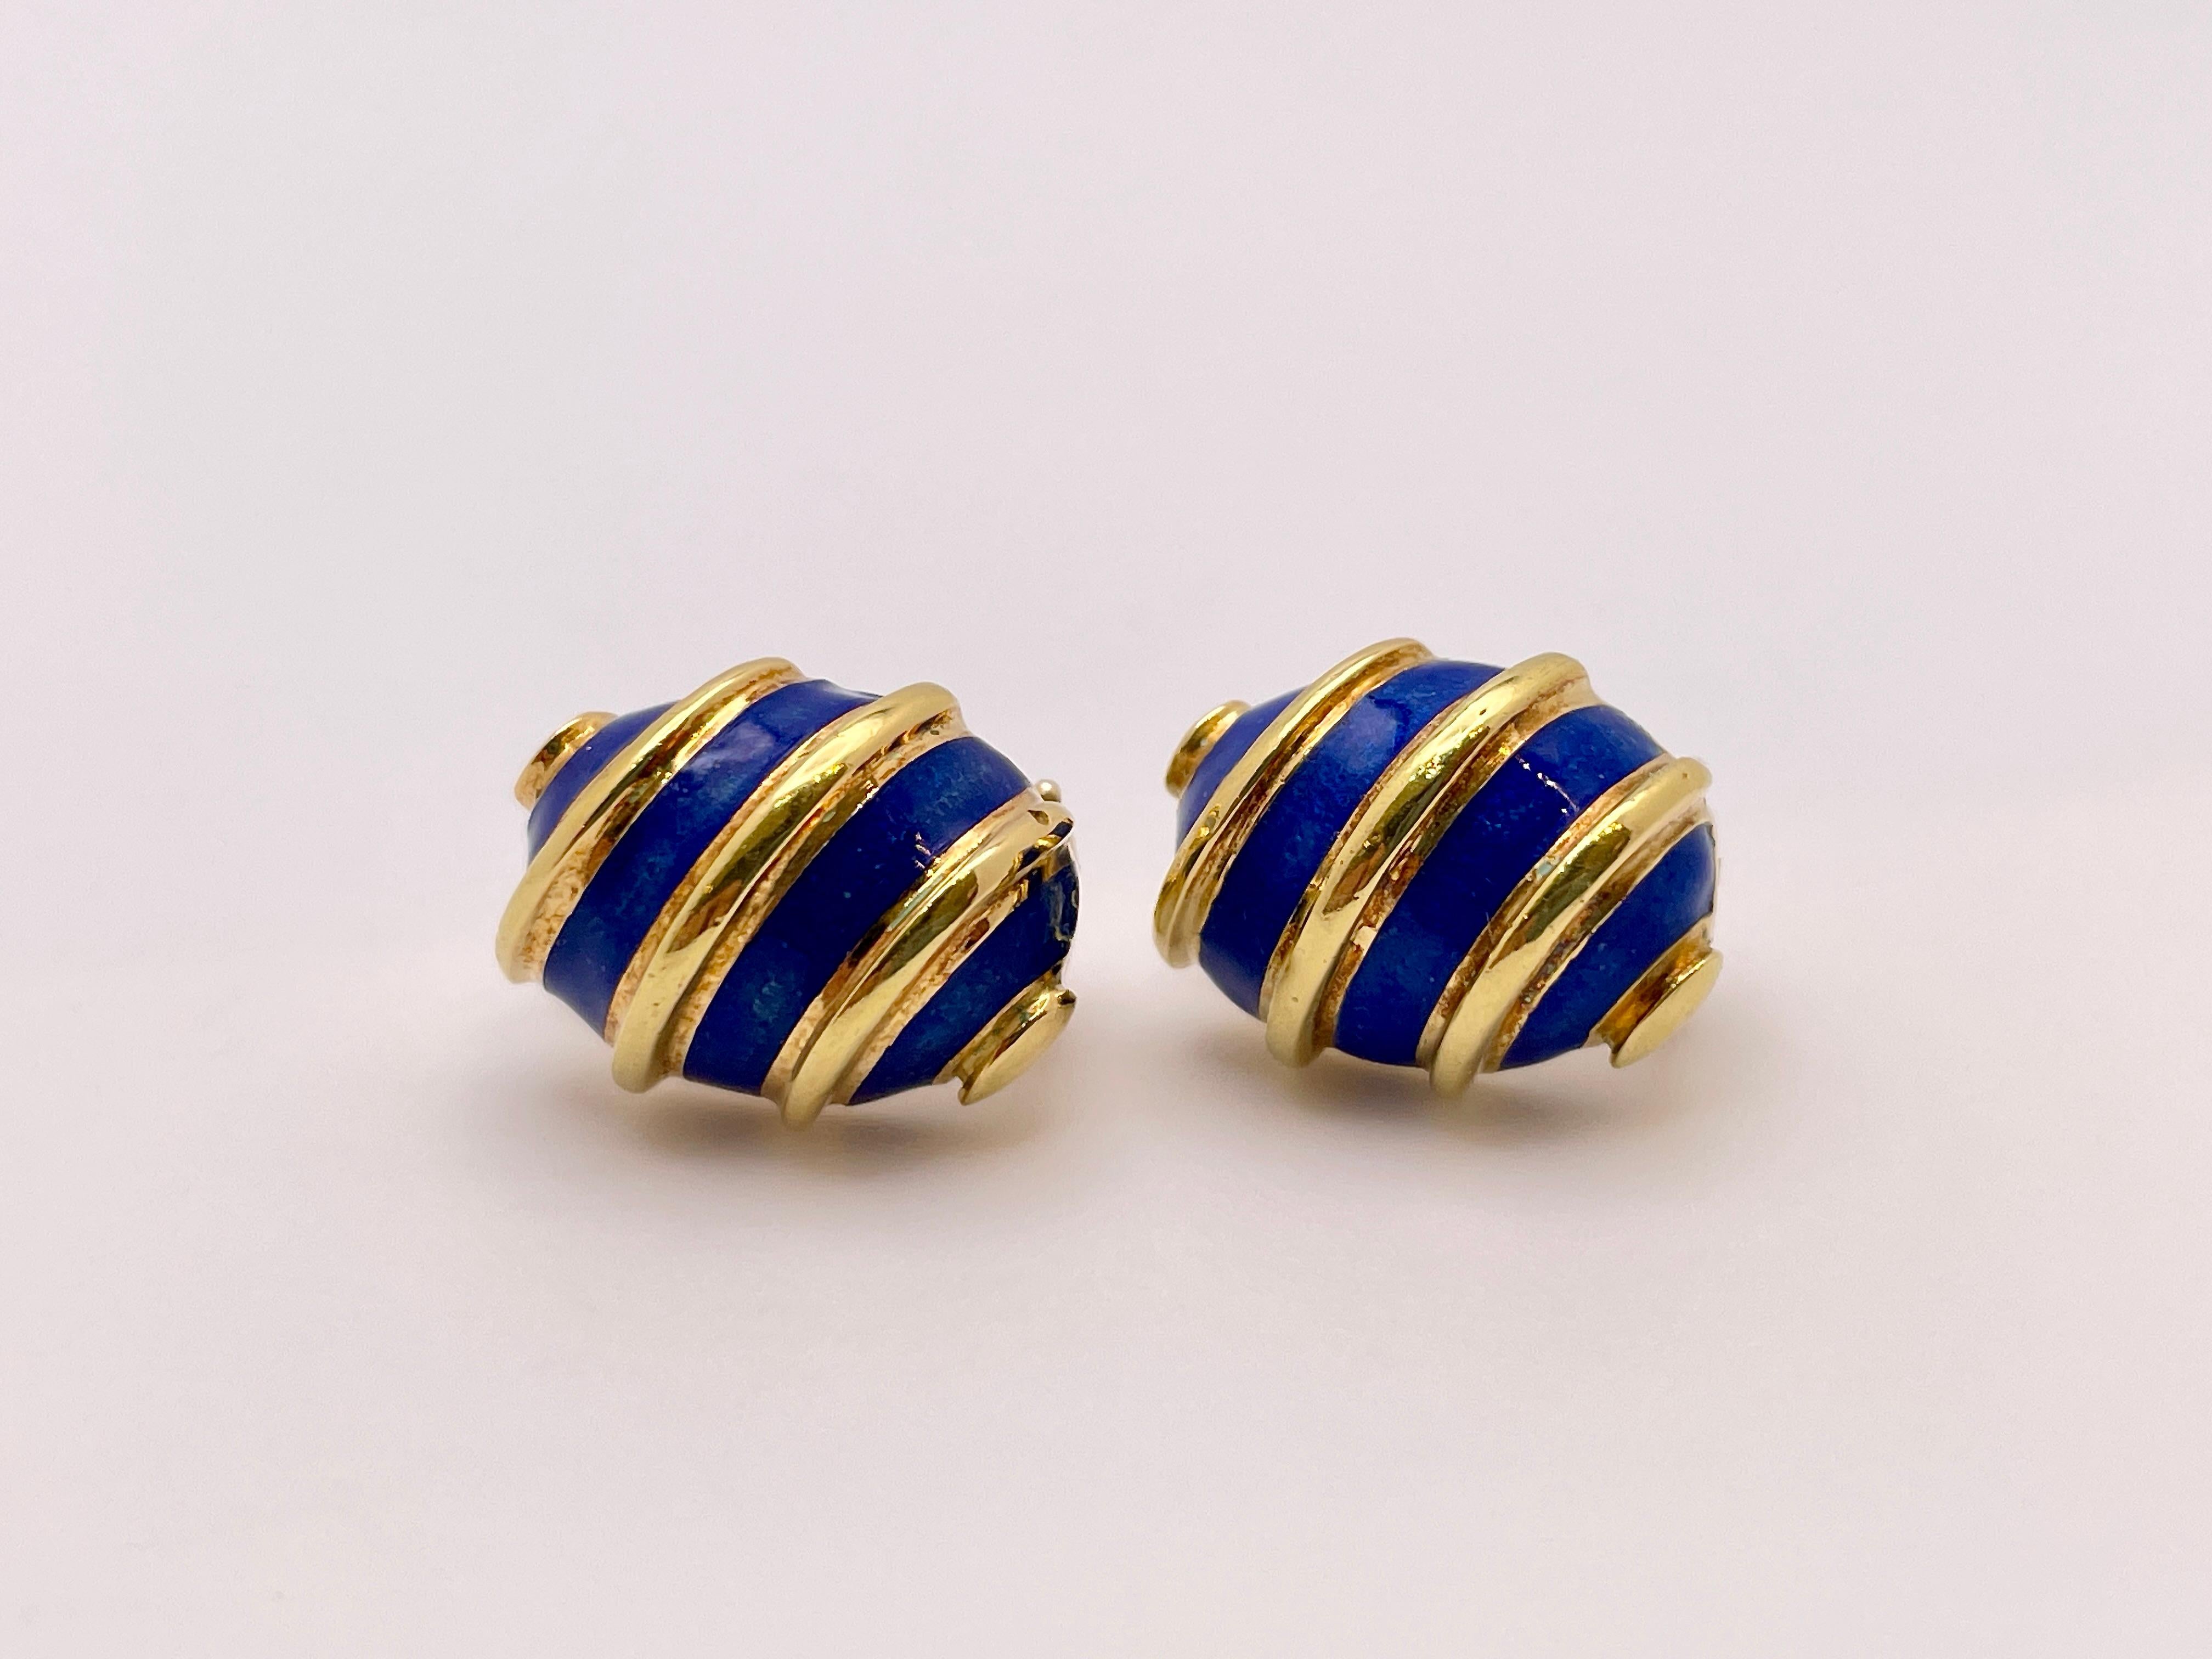 An 18K yellow gold Tiffany & Co. Schlumberger blue enamel earrings. These earrings feature a gorgeous ocean-blue enamel between the raised golden bars. Both are signed Tiffany 18K Schlumberger. These earrings are vintage, Circa 1980's, and have a